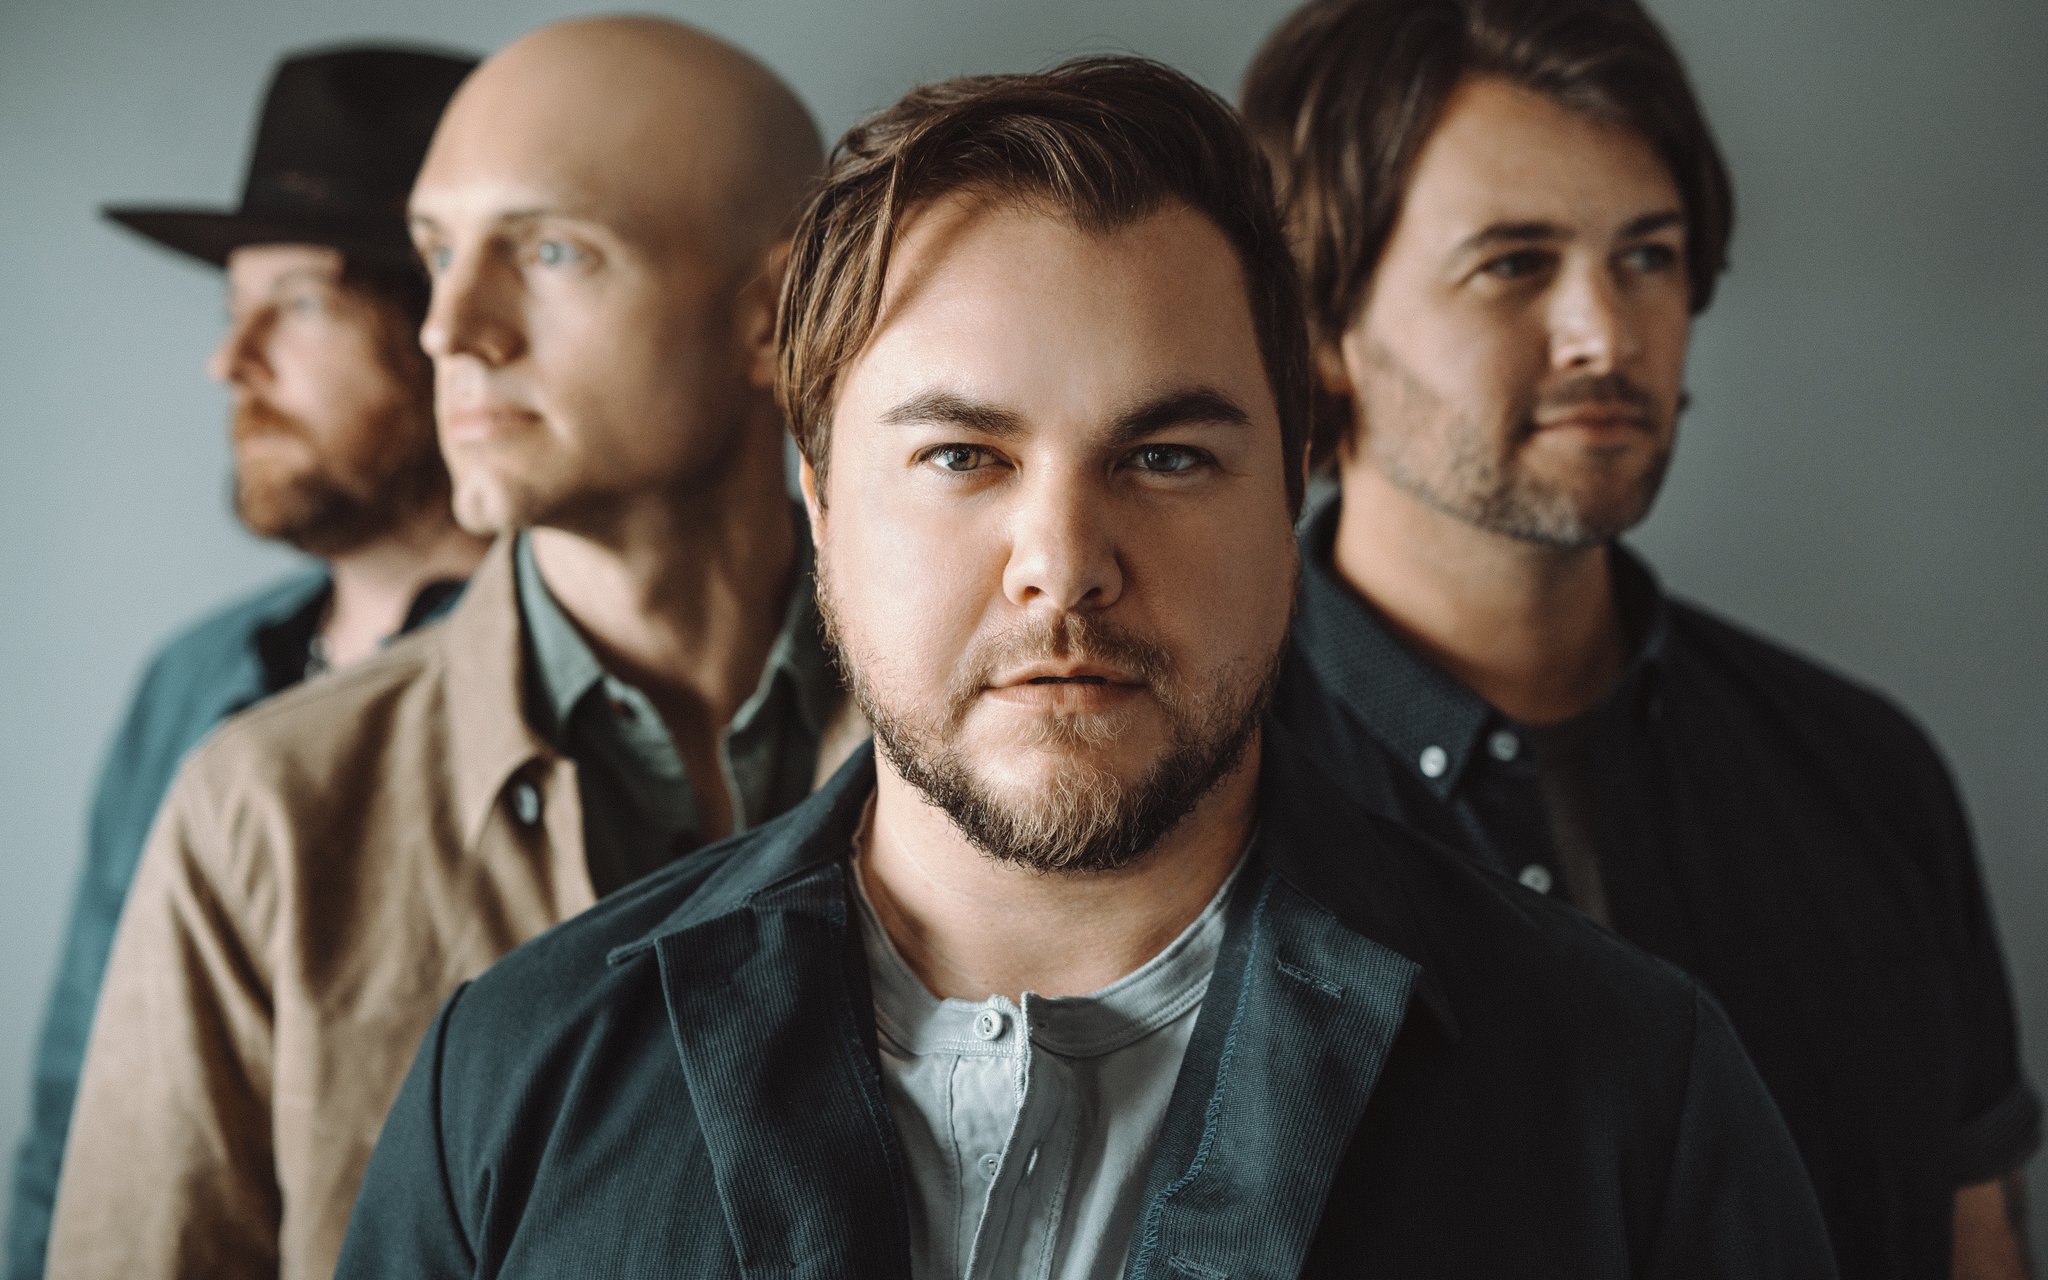 Eli Young Band’s New Video for “Love Ain’t” Shines a Light on the Sacrifices Partners Make for One Another